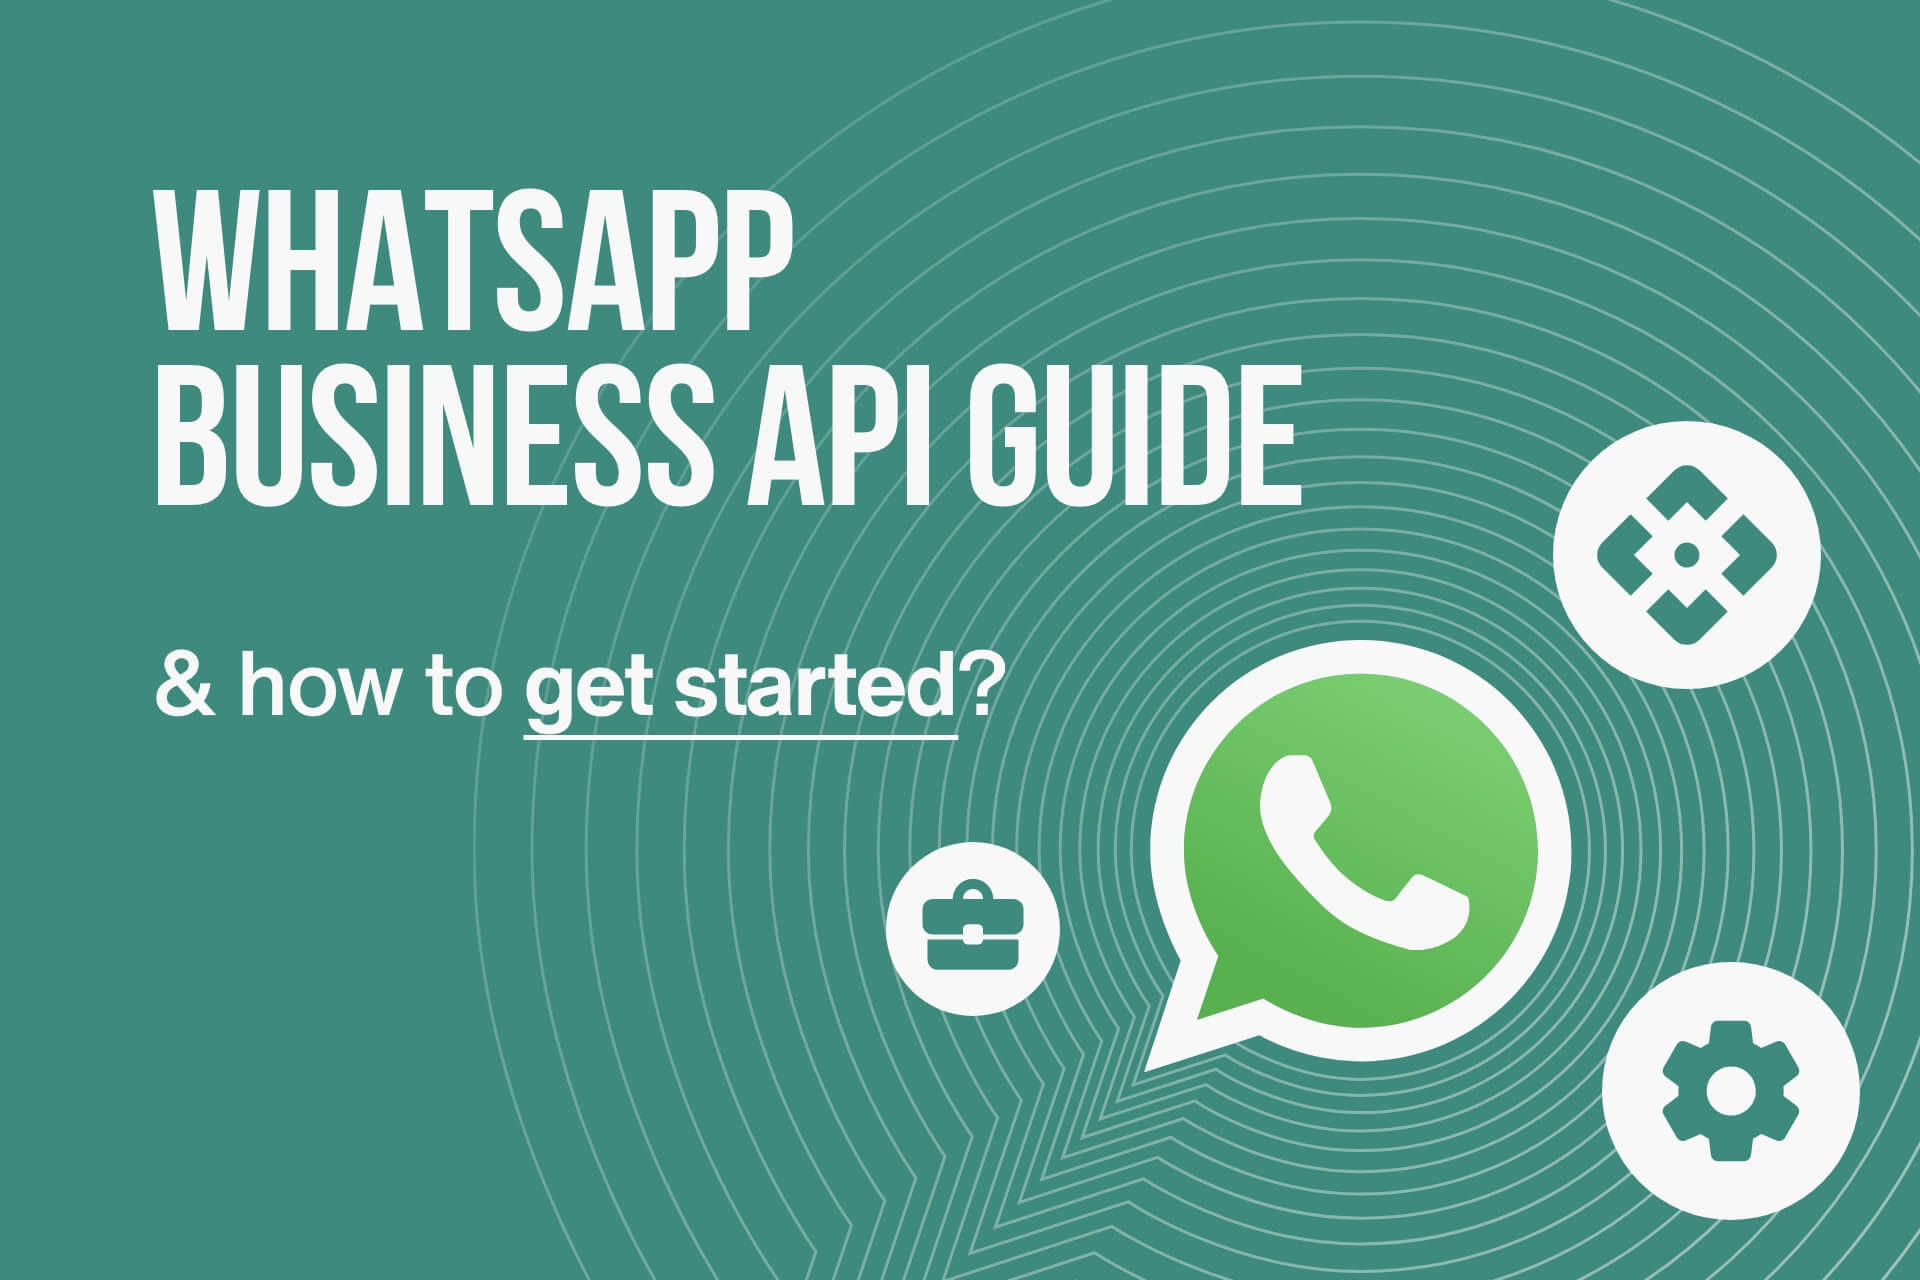 how to get started with whatsapp business api guide a phone whatsapp app is on the screen a girl standing